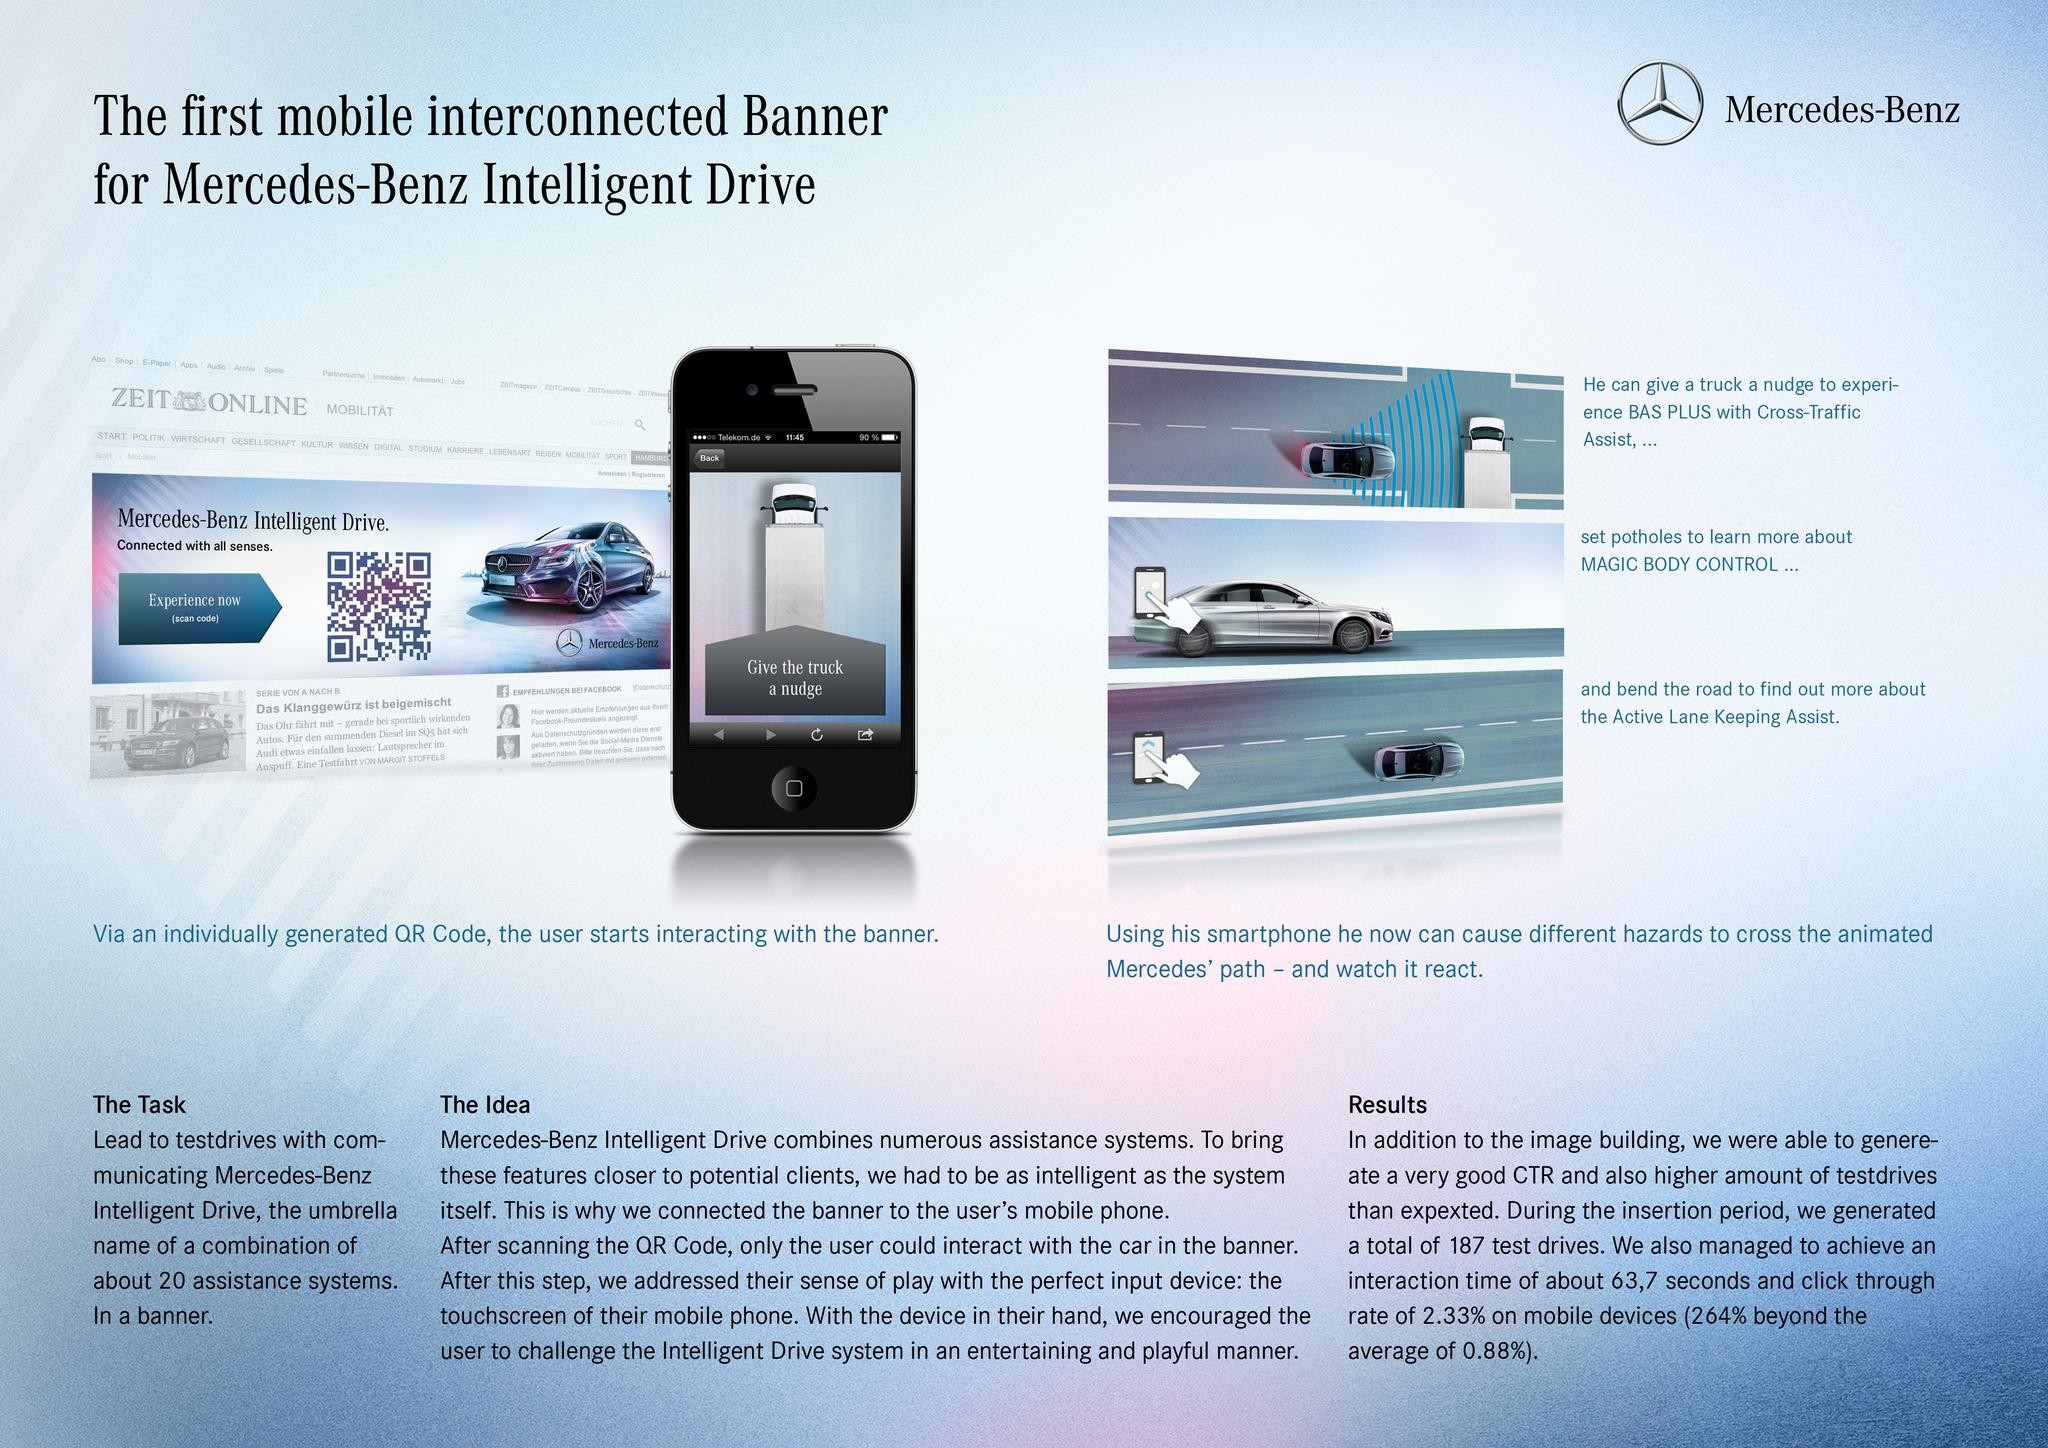 THE FIRST MOBILE INTERCONNECTED BANNER FOR MERCEDES-BENZ INTELLIGENT DRIVE.